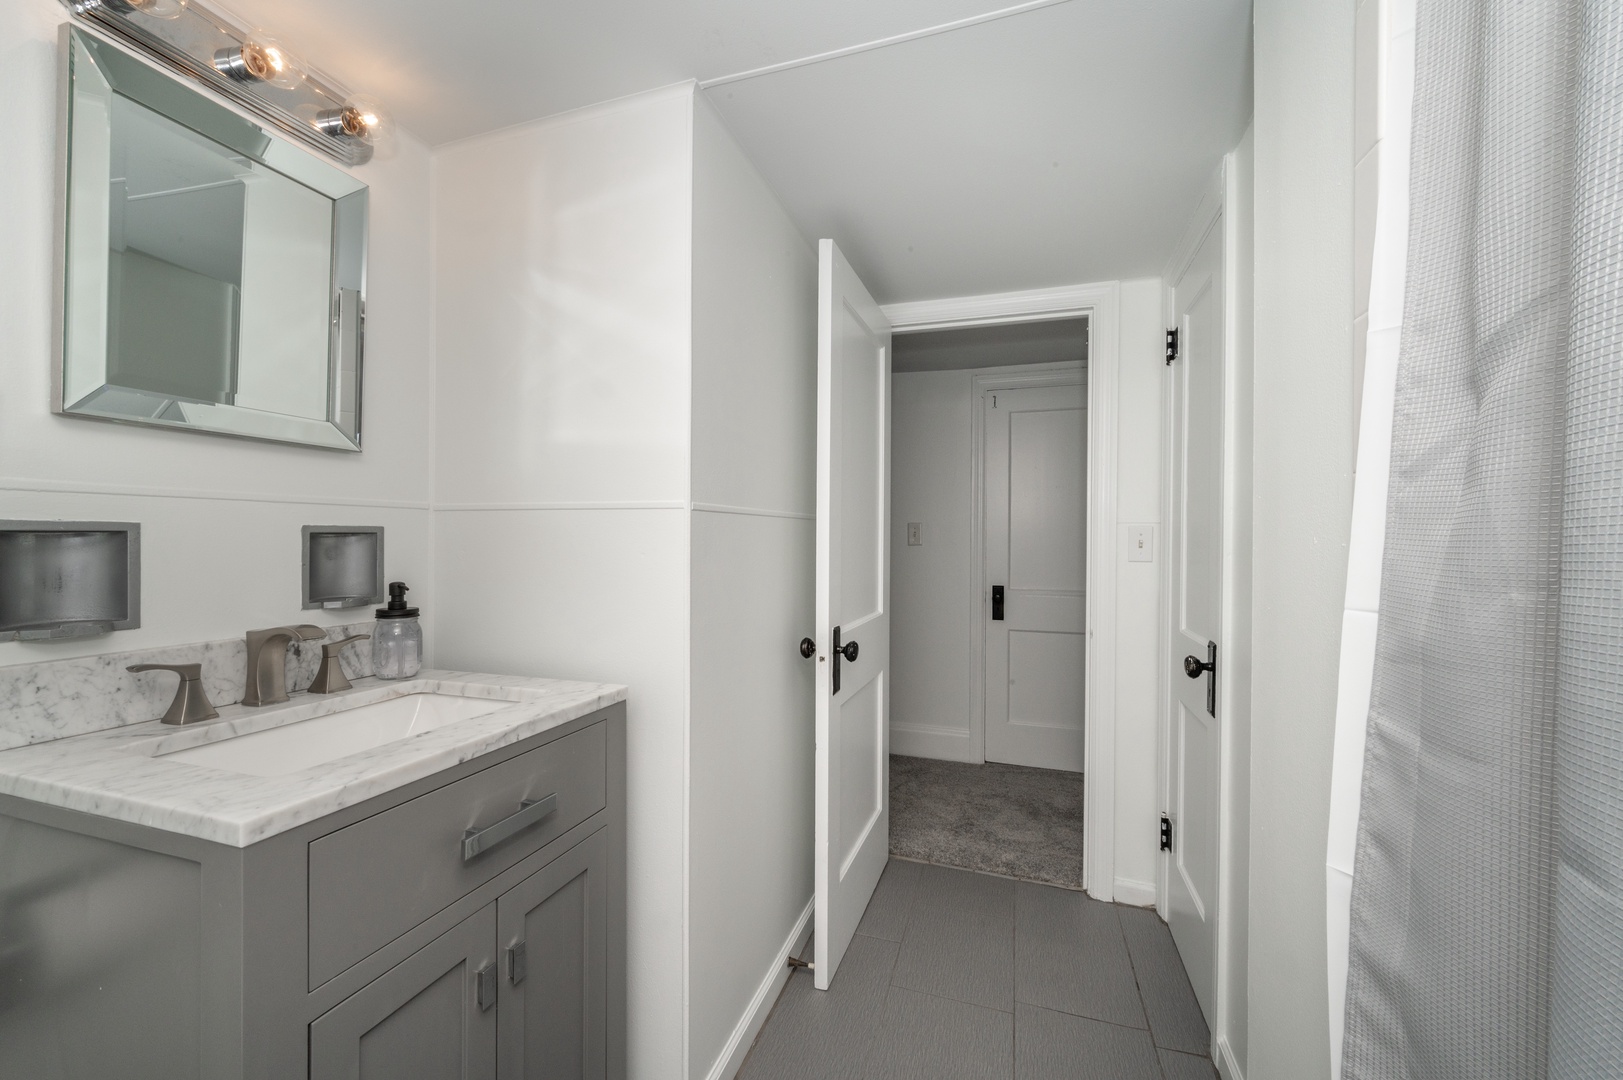 Unit 2 – A full bath on the 3rd level offers a single vanity & walk-in shower